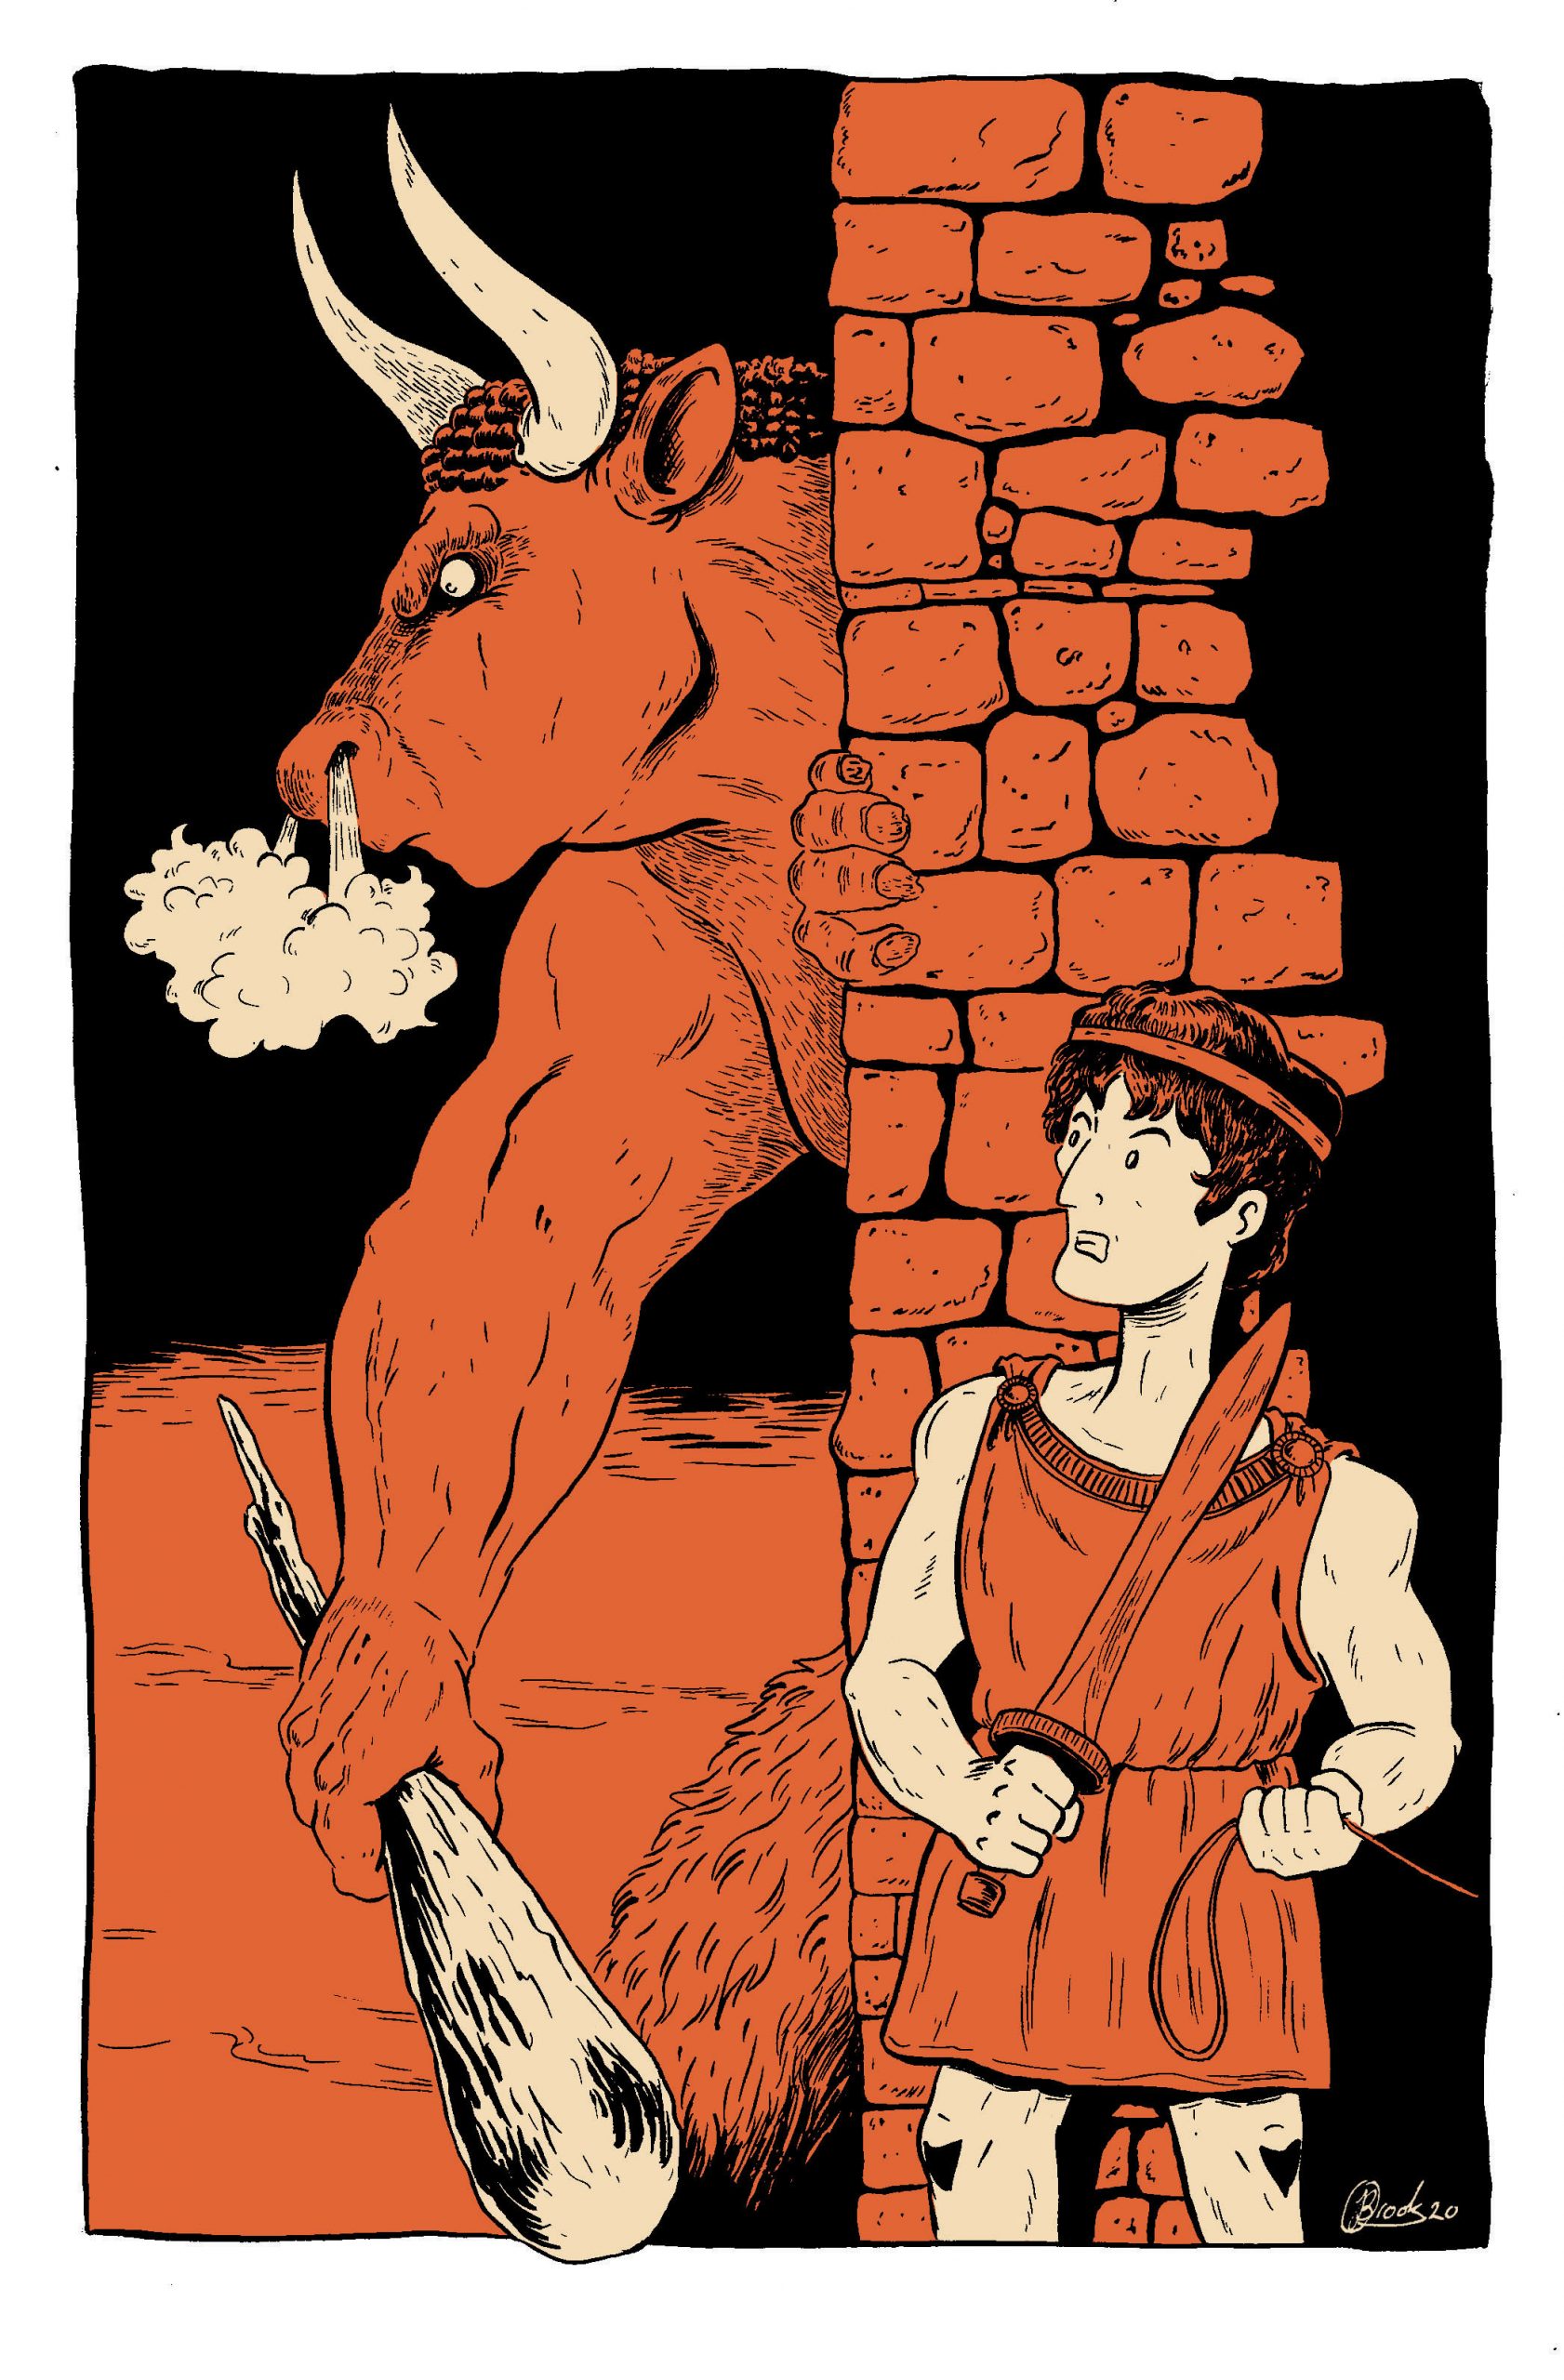 Theseus and the Minotaur by Yvan Pommaux